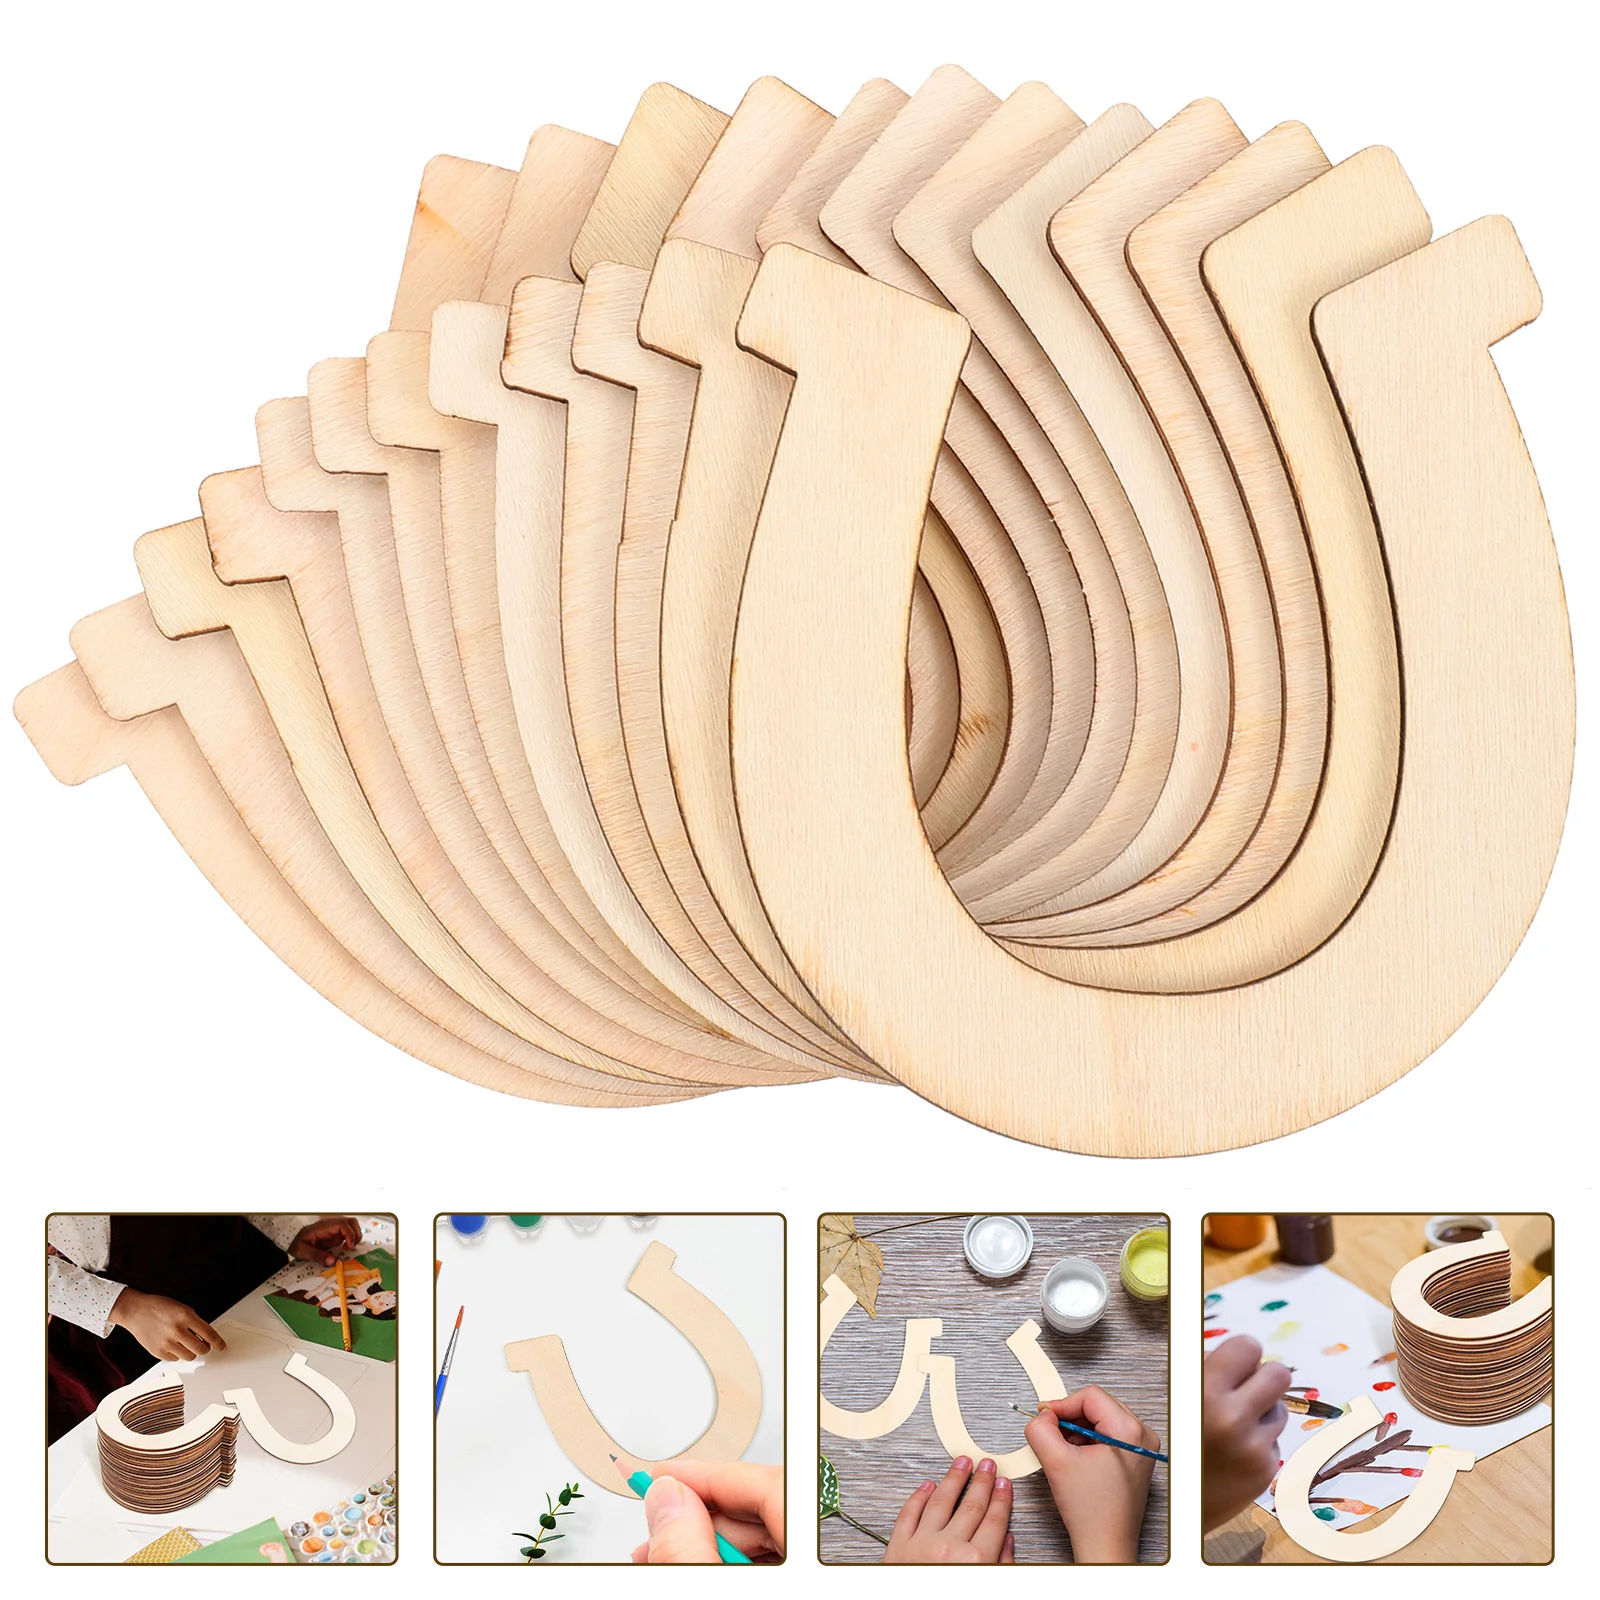 

Wood Unfinished Horseshoe Wooden Crafts Slices Cutouts Piece Ornament Disc Embellishment Gift Tag Shapes Graffitichip Chips Diy